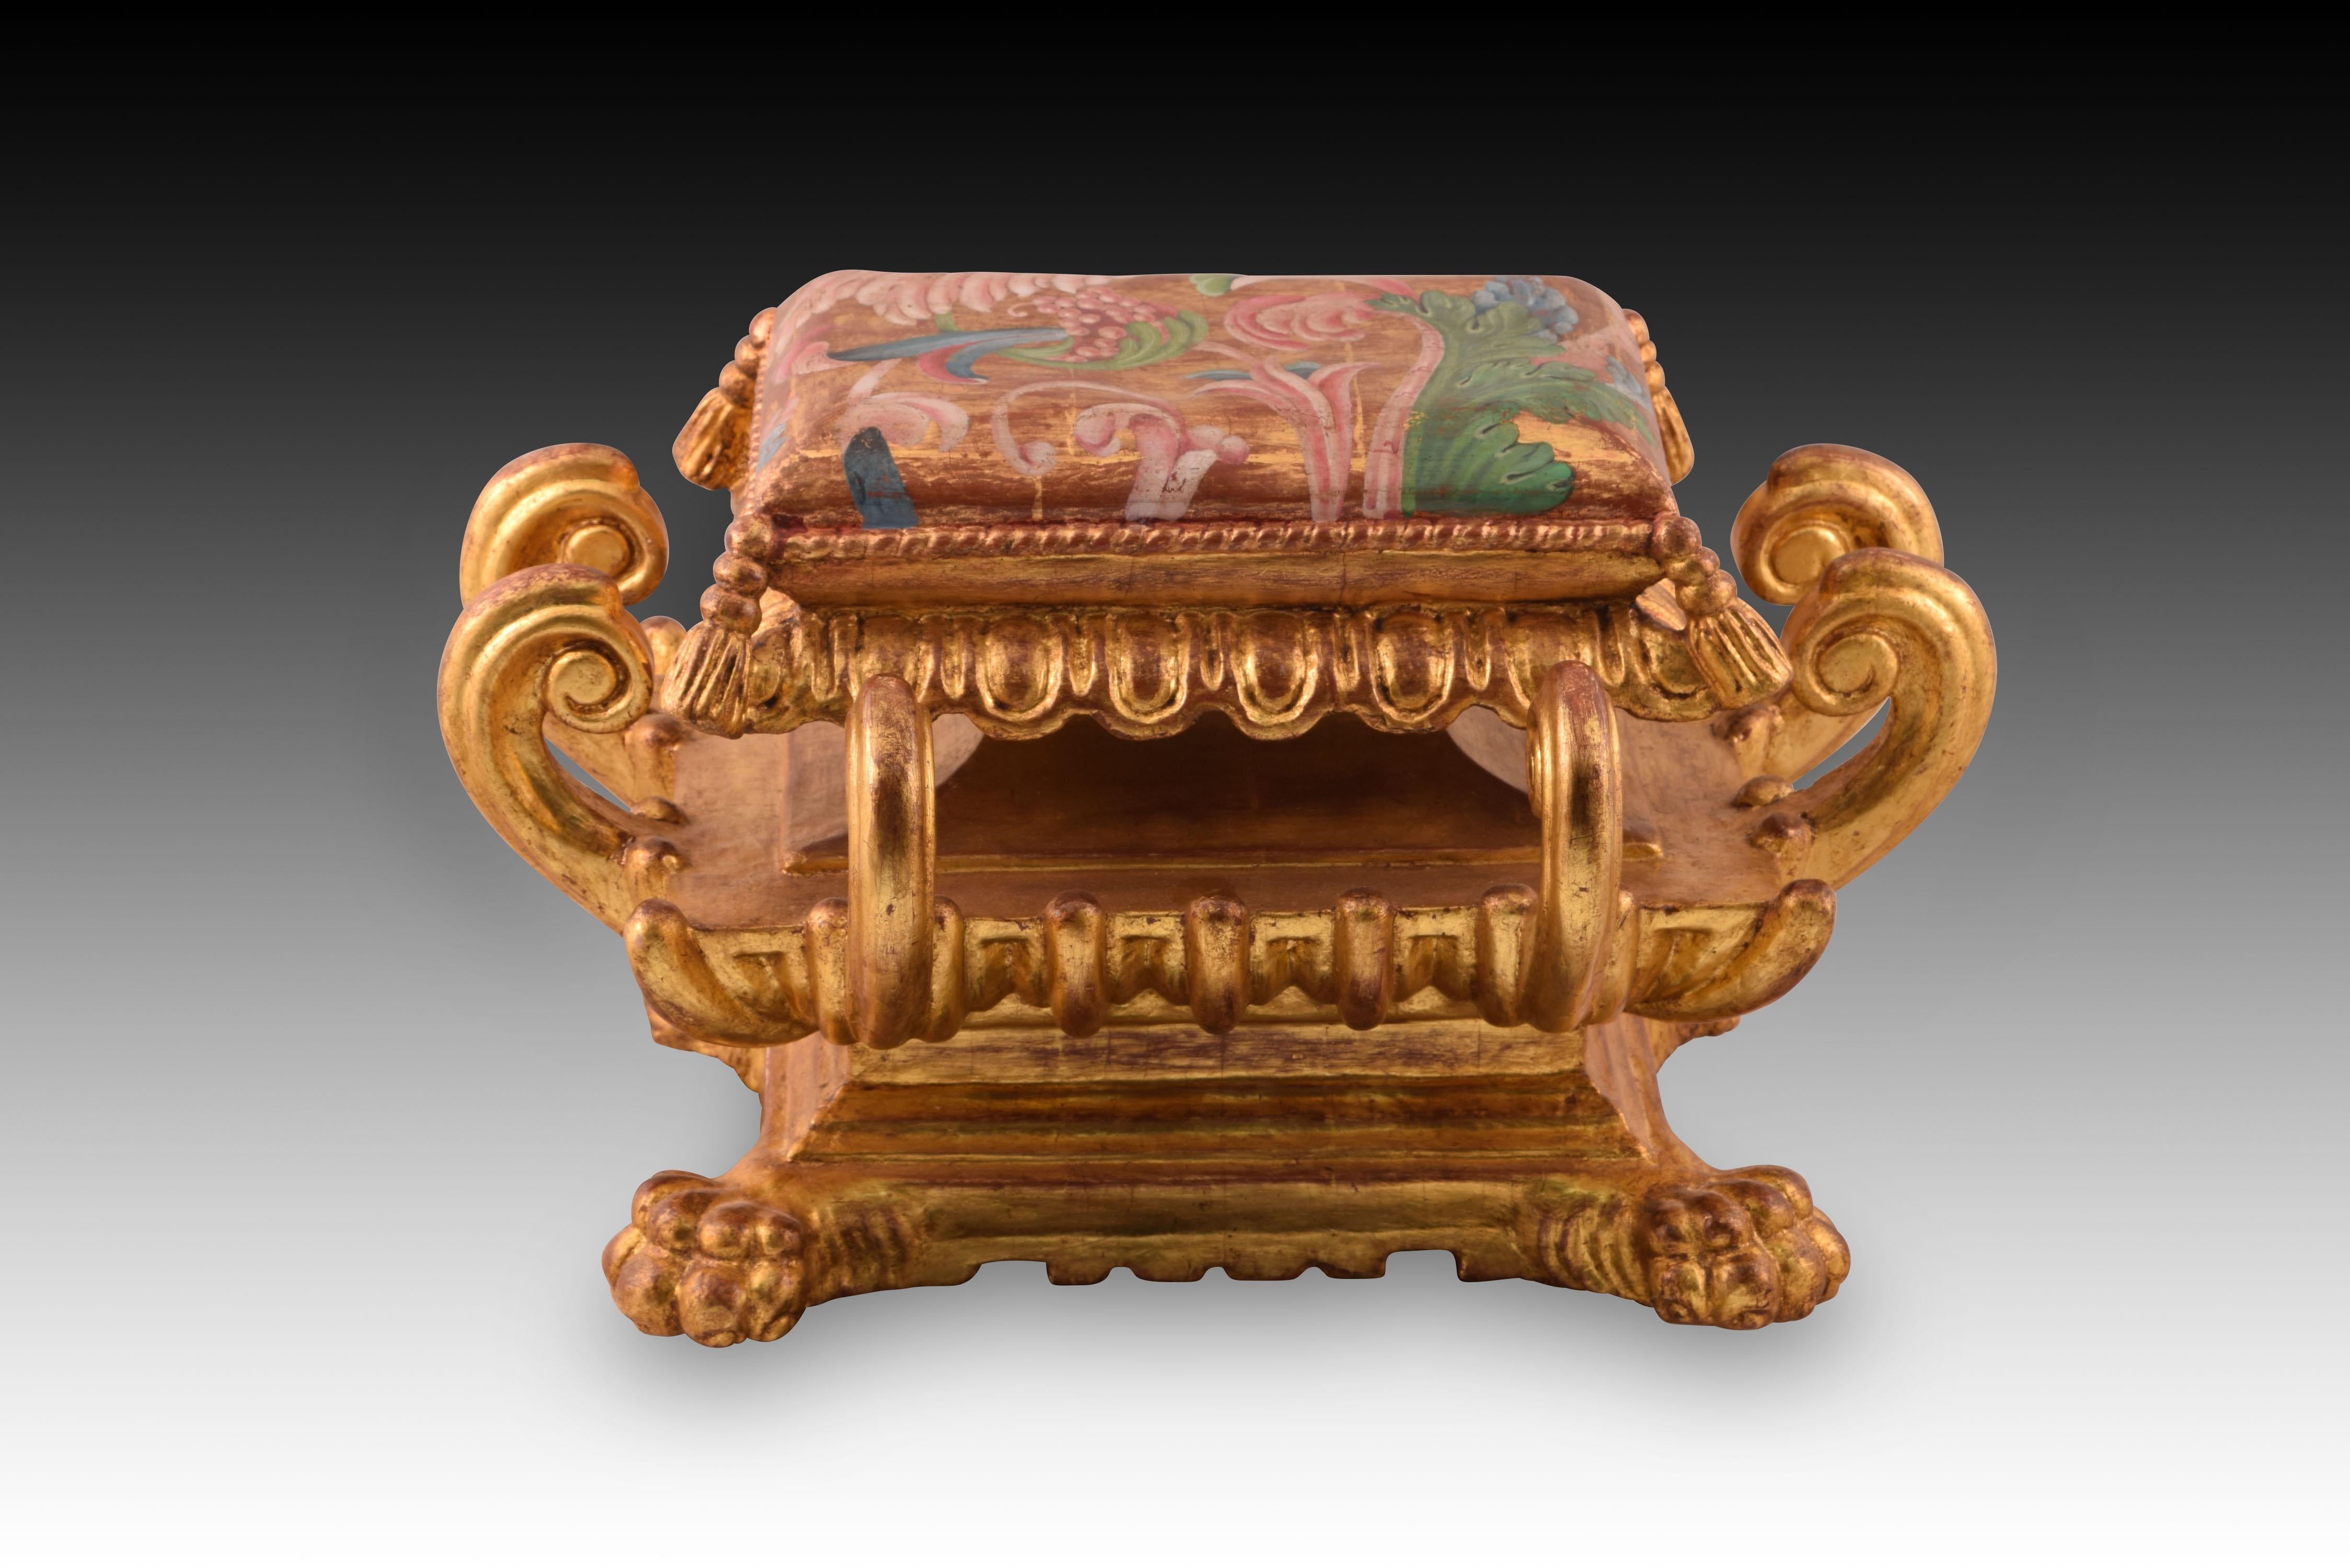 Gallon base. Carved and polychrome wood. Inspired by models from the 17th century.
Rectangular base with a similar cushion on the top (decorated with plant elements) and complex lines of curves and countercurves enhanced with architectural elements,